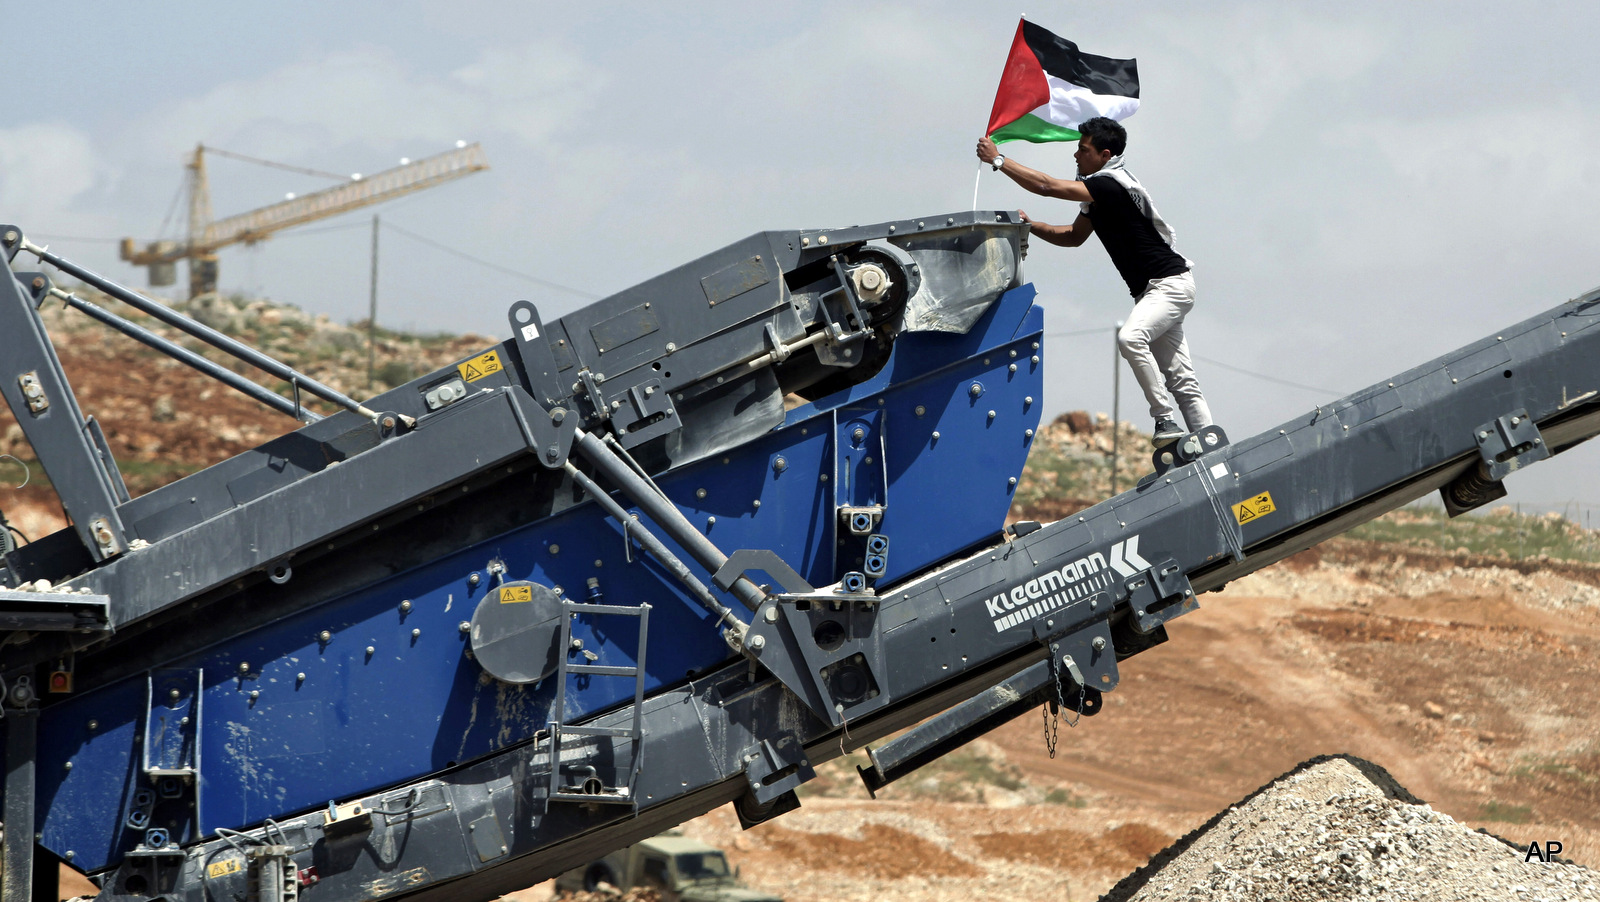 A protester posts a Palestinian flag on Israeli construction equipment at a building site adjacent to the Israeli settlement of Beitar Illit during a protest marking Land Day, in the village of Wadi Fukin, near the West Bank city of Bethlehem, Monday, March 30, 2015. Land Day commemorates riots on March 30, 1976, when six people were killed during a protest by Israeli Arabs whose property was annexed in northern Israel to expand Jewish communities.